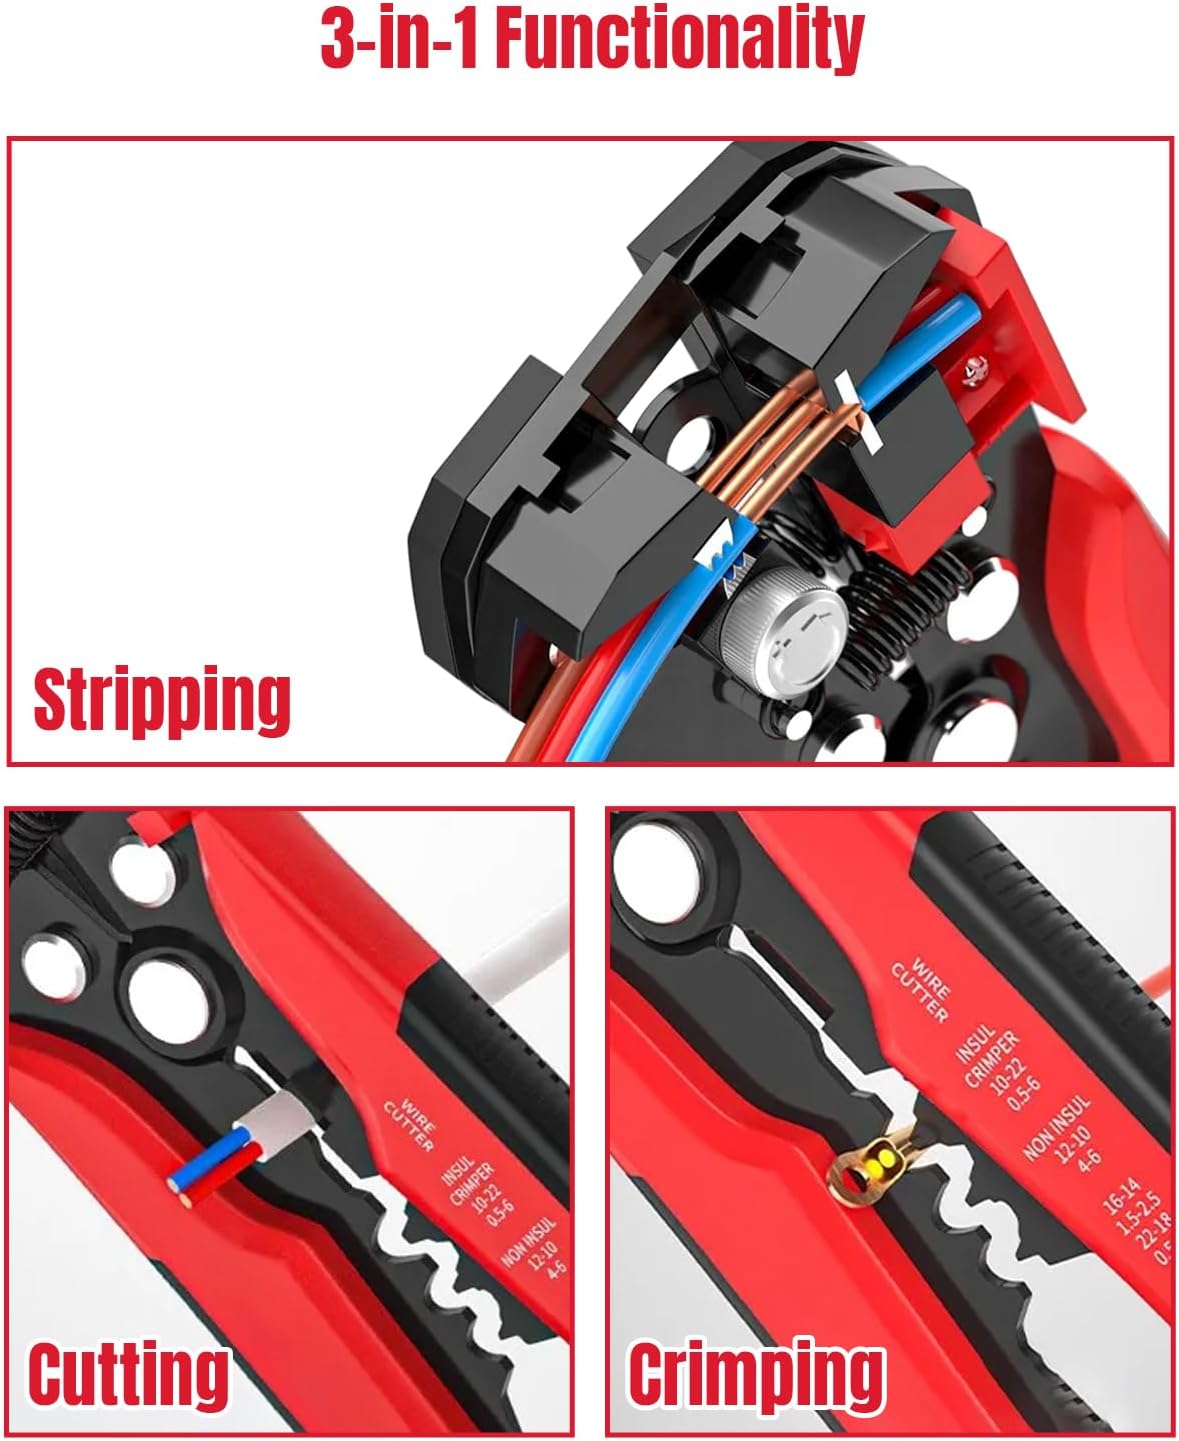 Electric wire stripper with 3-in-1 function, ideal for stripping, cutting, and crimping wires efficiently.